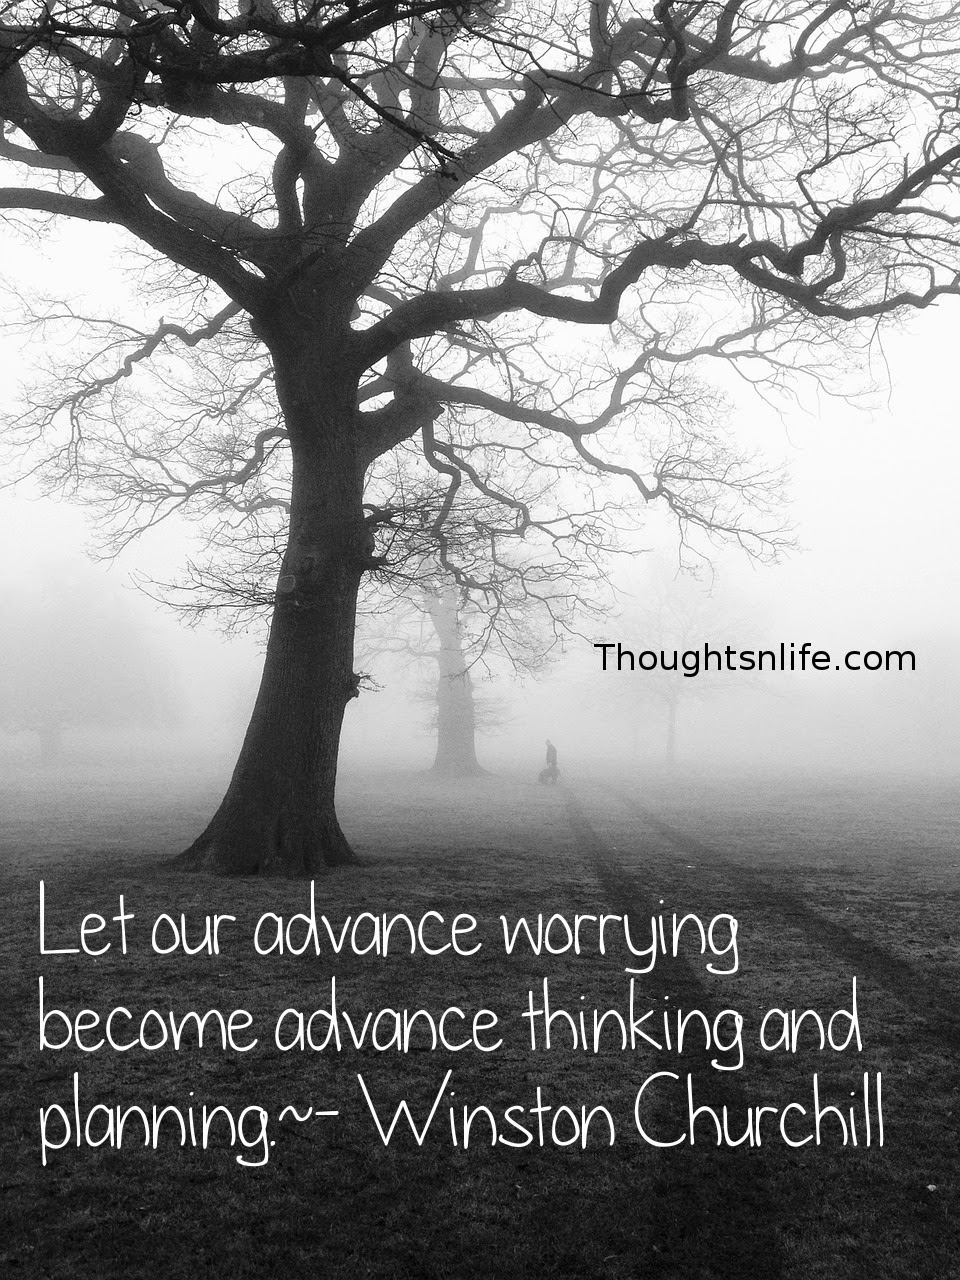 Thoughtsnlife.com: Let our advance worrying become advance thinking and planning. - Winston Churchill